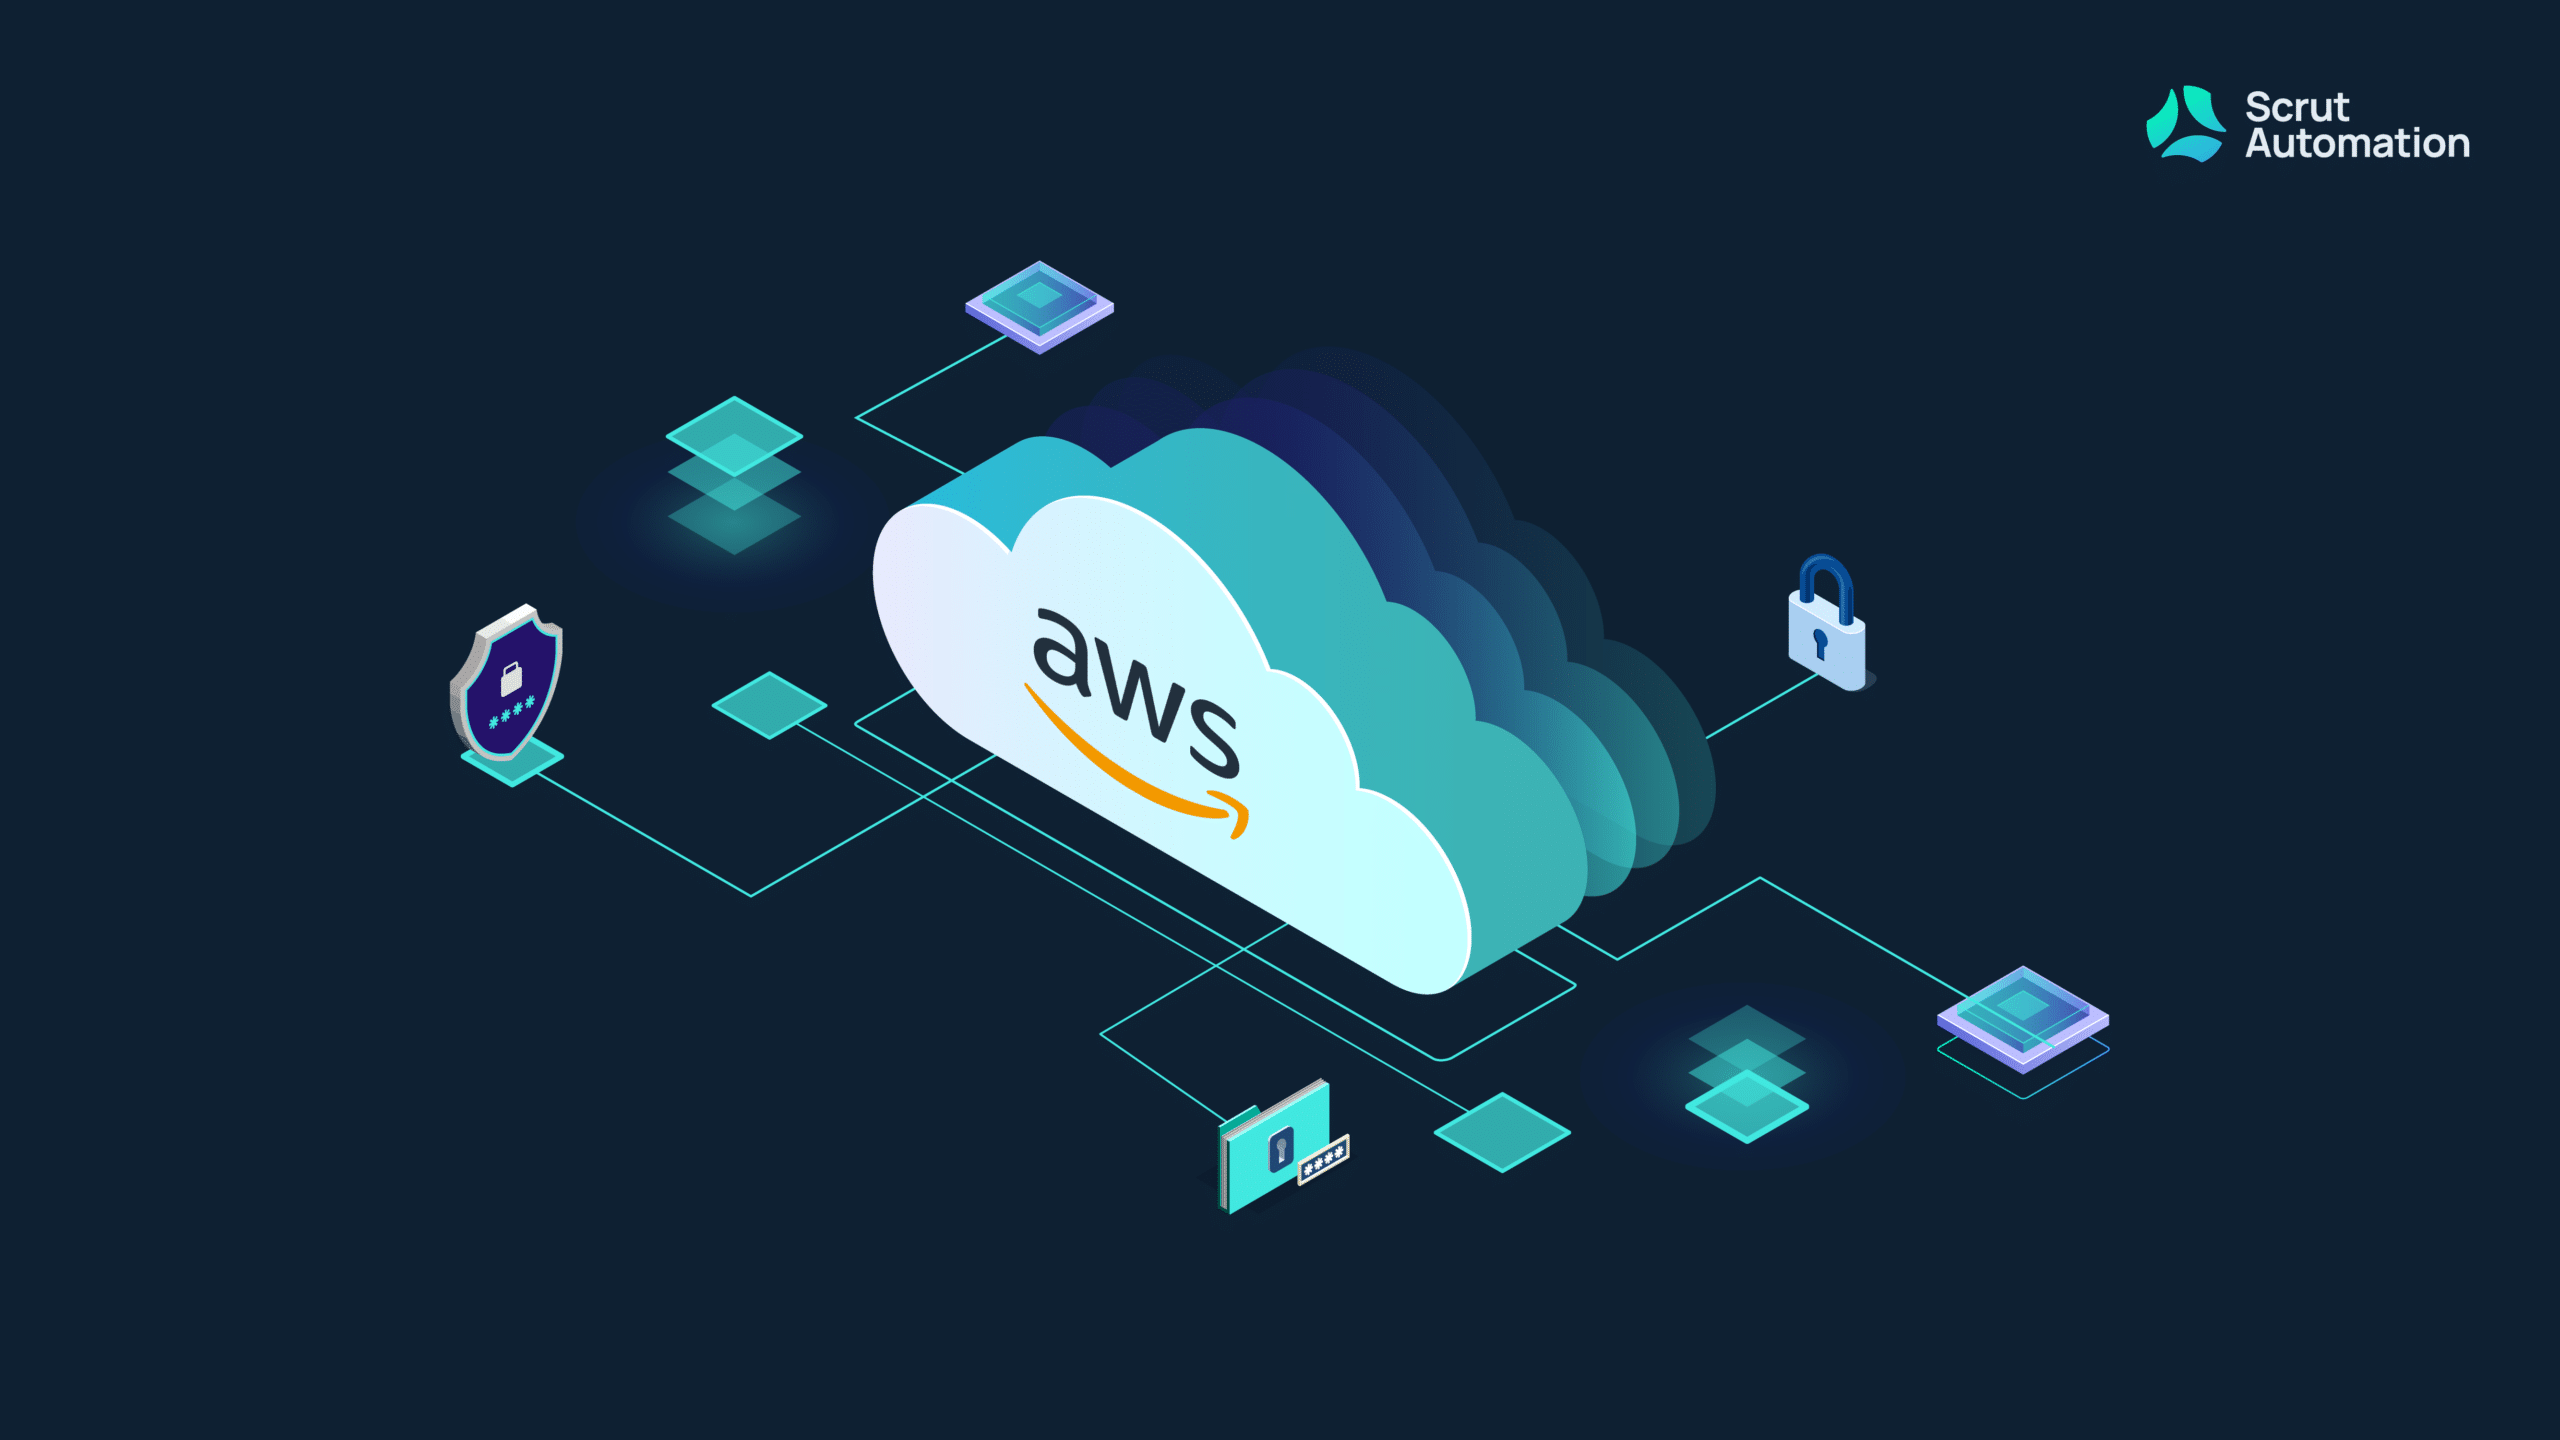 AWS is a cloud computing solution that comes with its own security features. However, professionals must understand its best practices on how to leverage them.